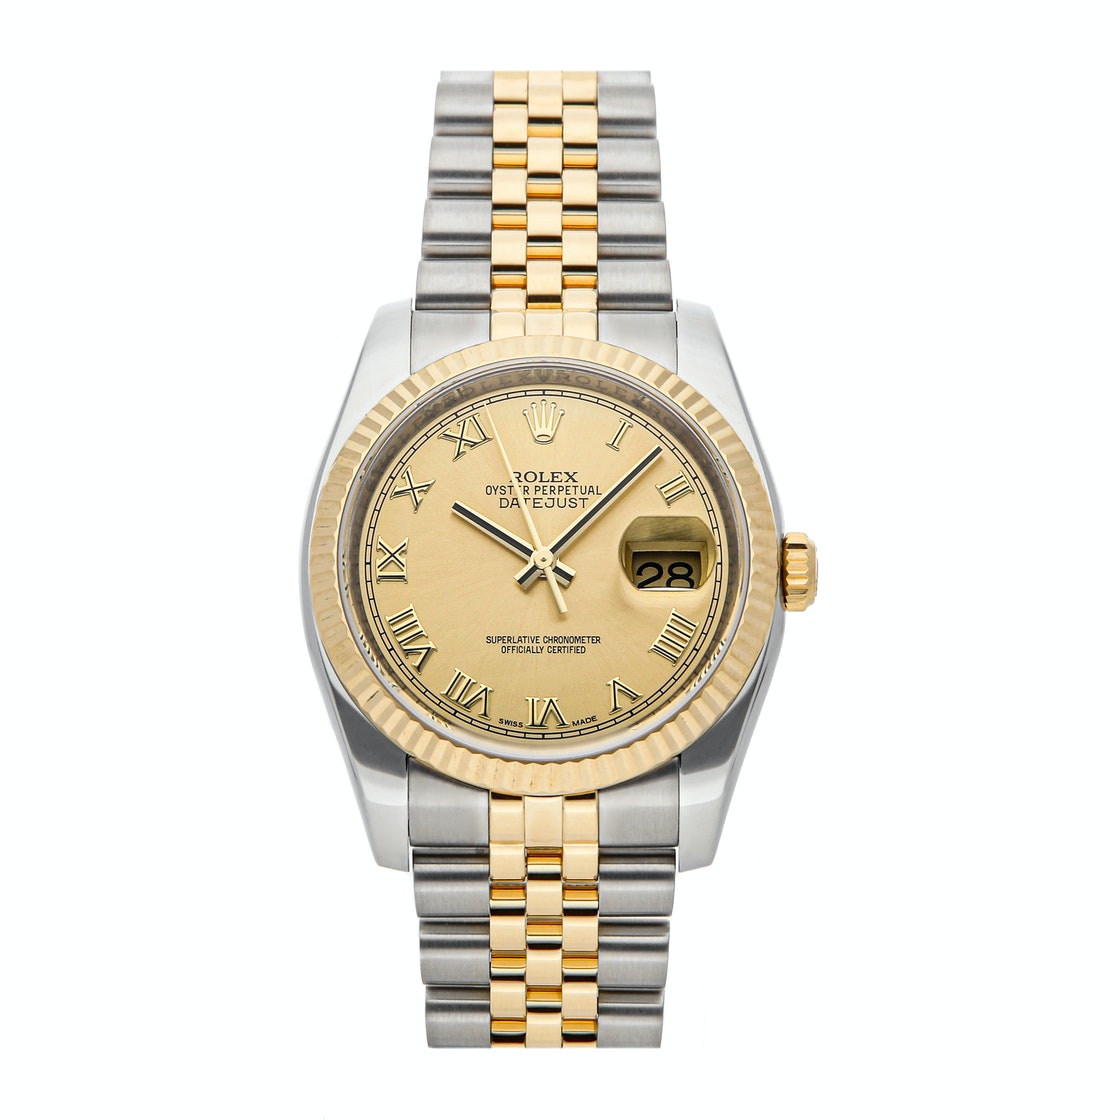 Pre-owned Rolex Champagne 18k Yellow Gold And Stainless Steel Datejust 116233 Men's Wristwatch 36 Mm